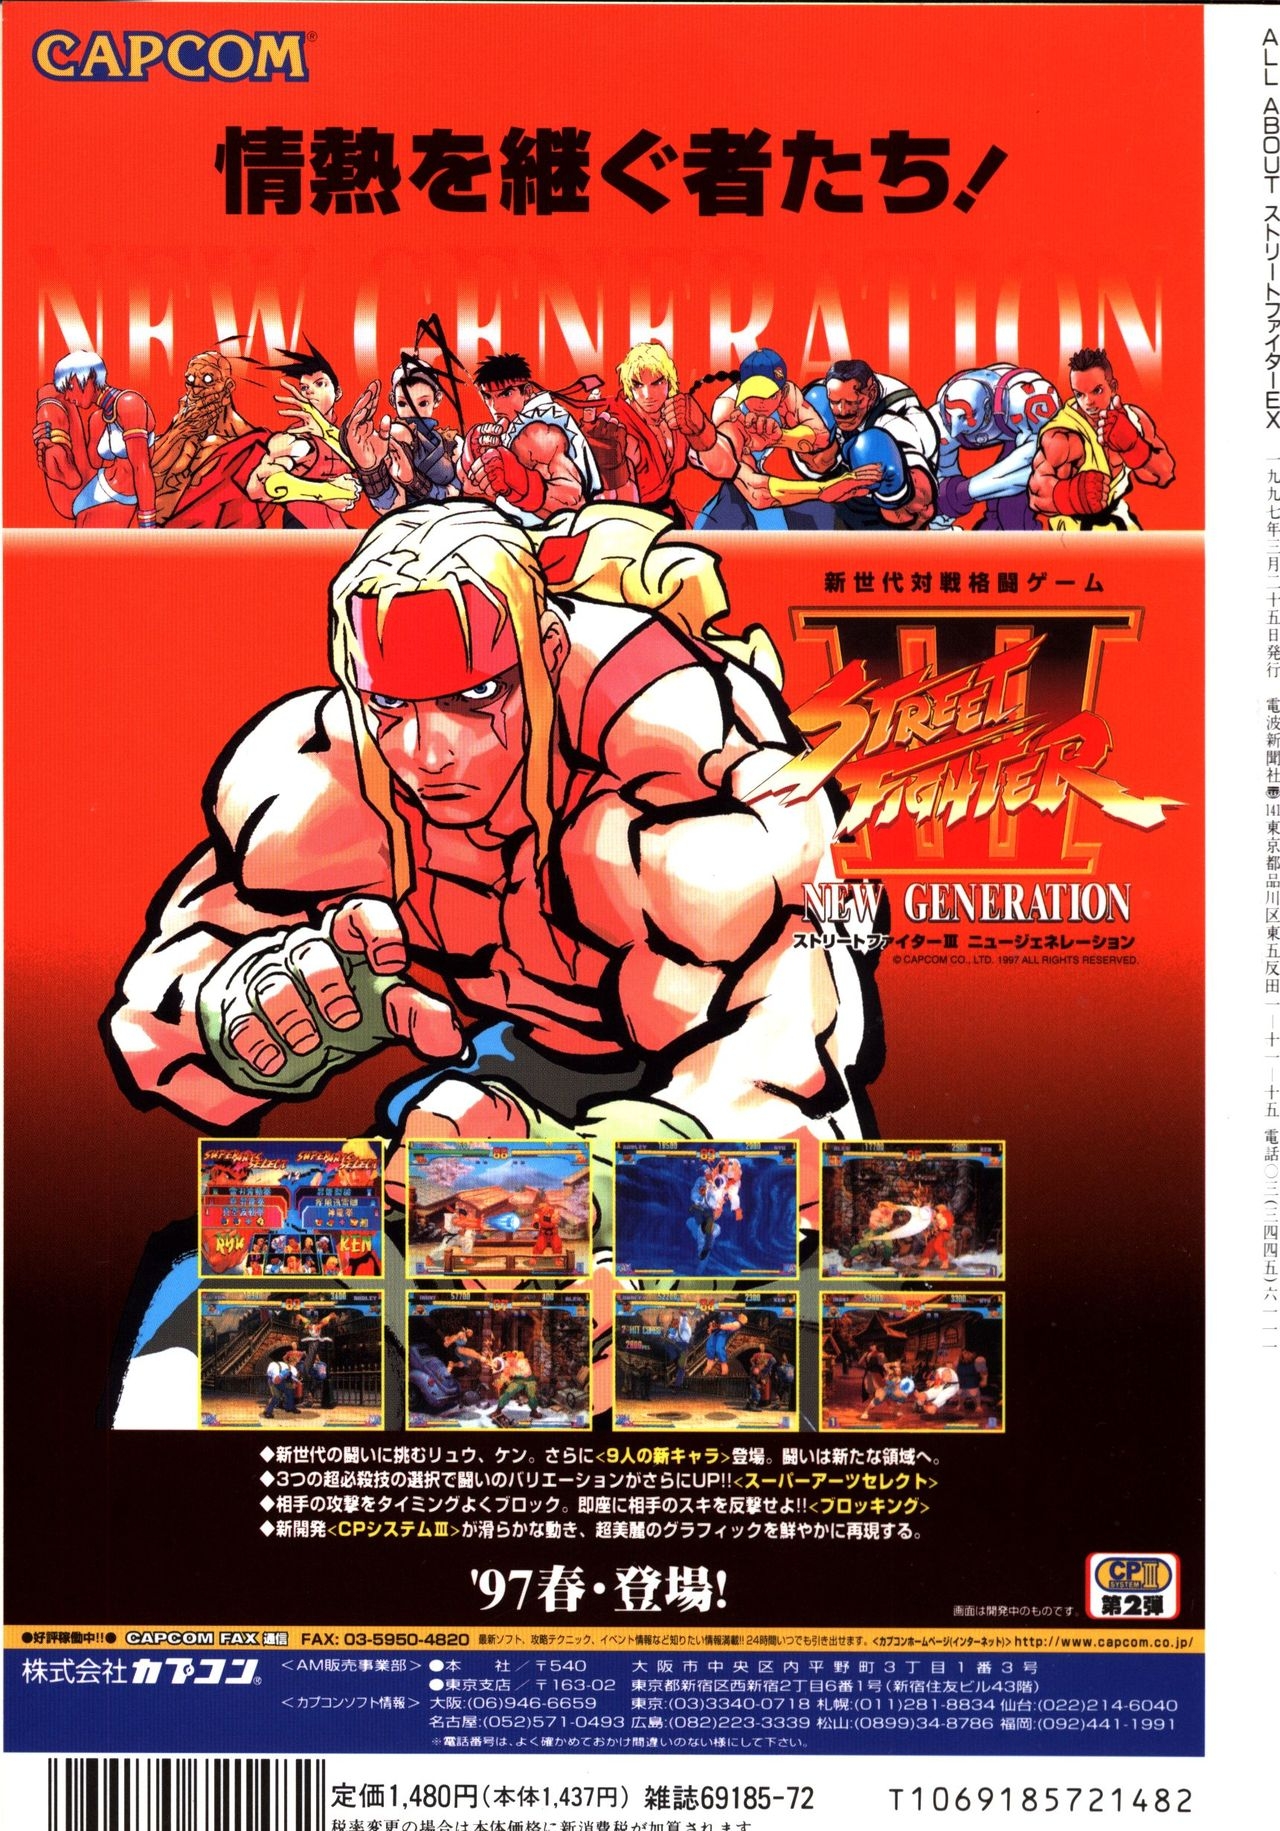 All About Street Fighter EX 307